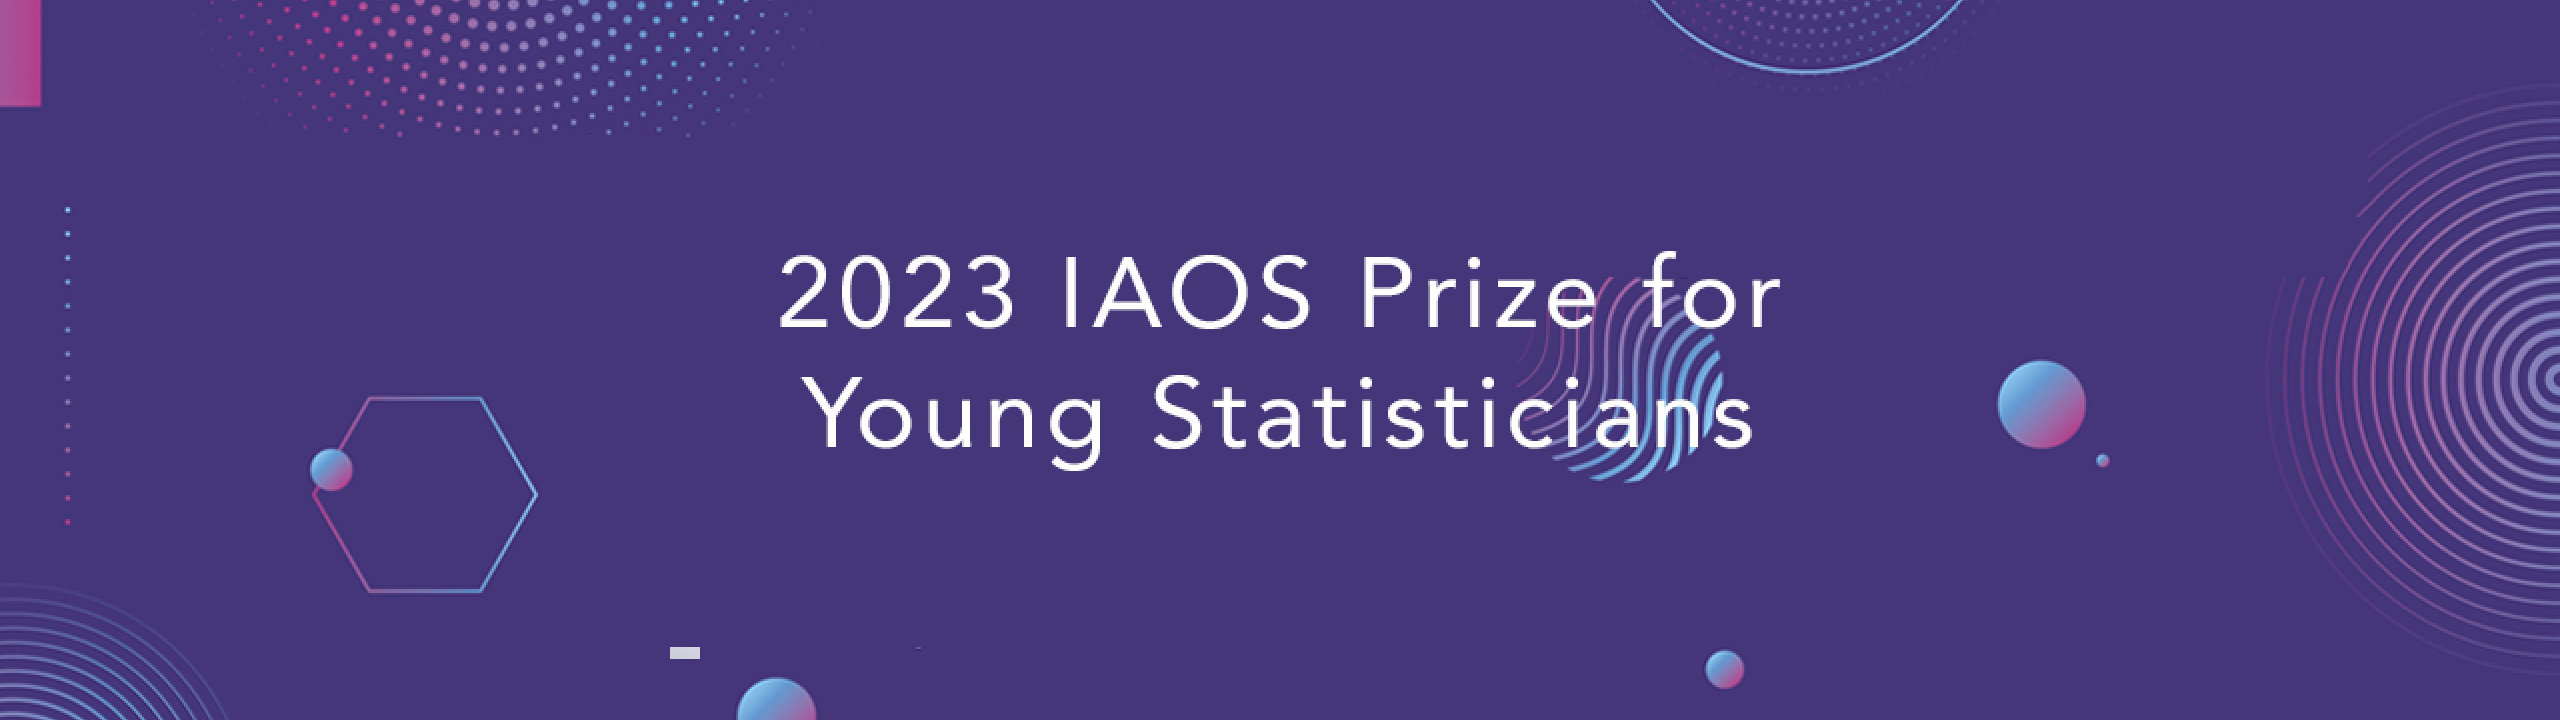 iaos-prize-young-statisticians-2023